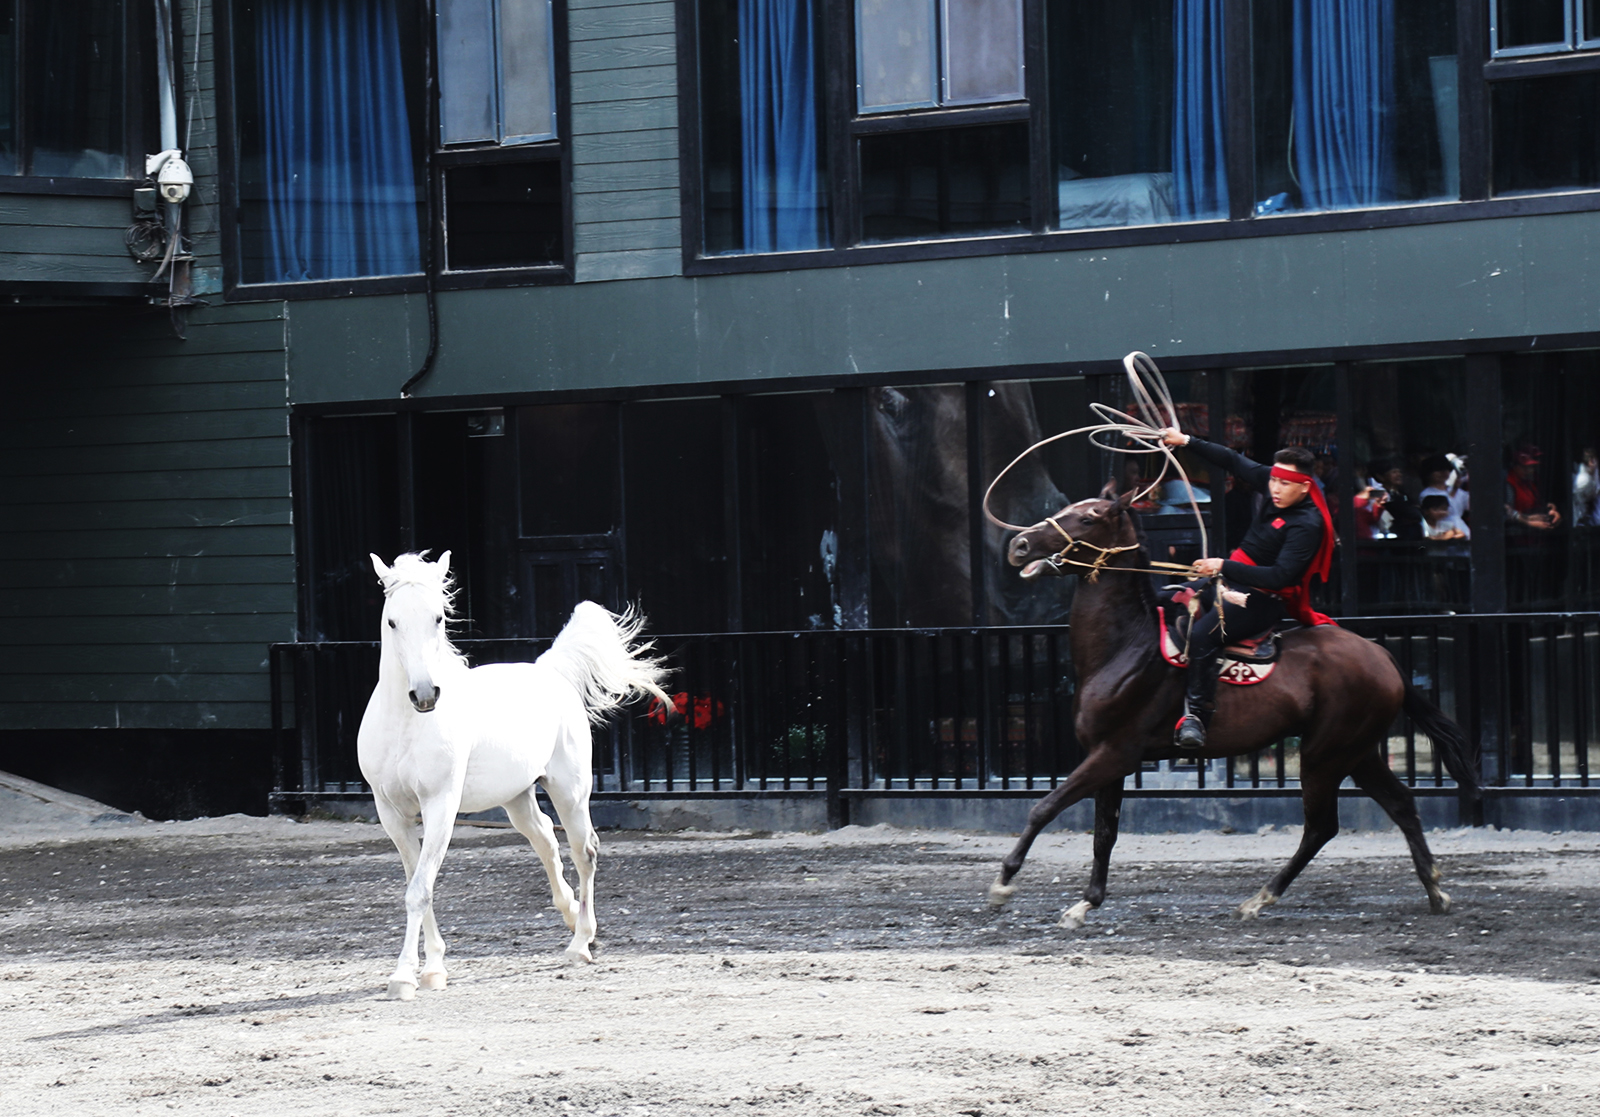 A horse performance is staged at a horse base in Urumqi, Xinjiang. /CGTN